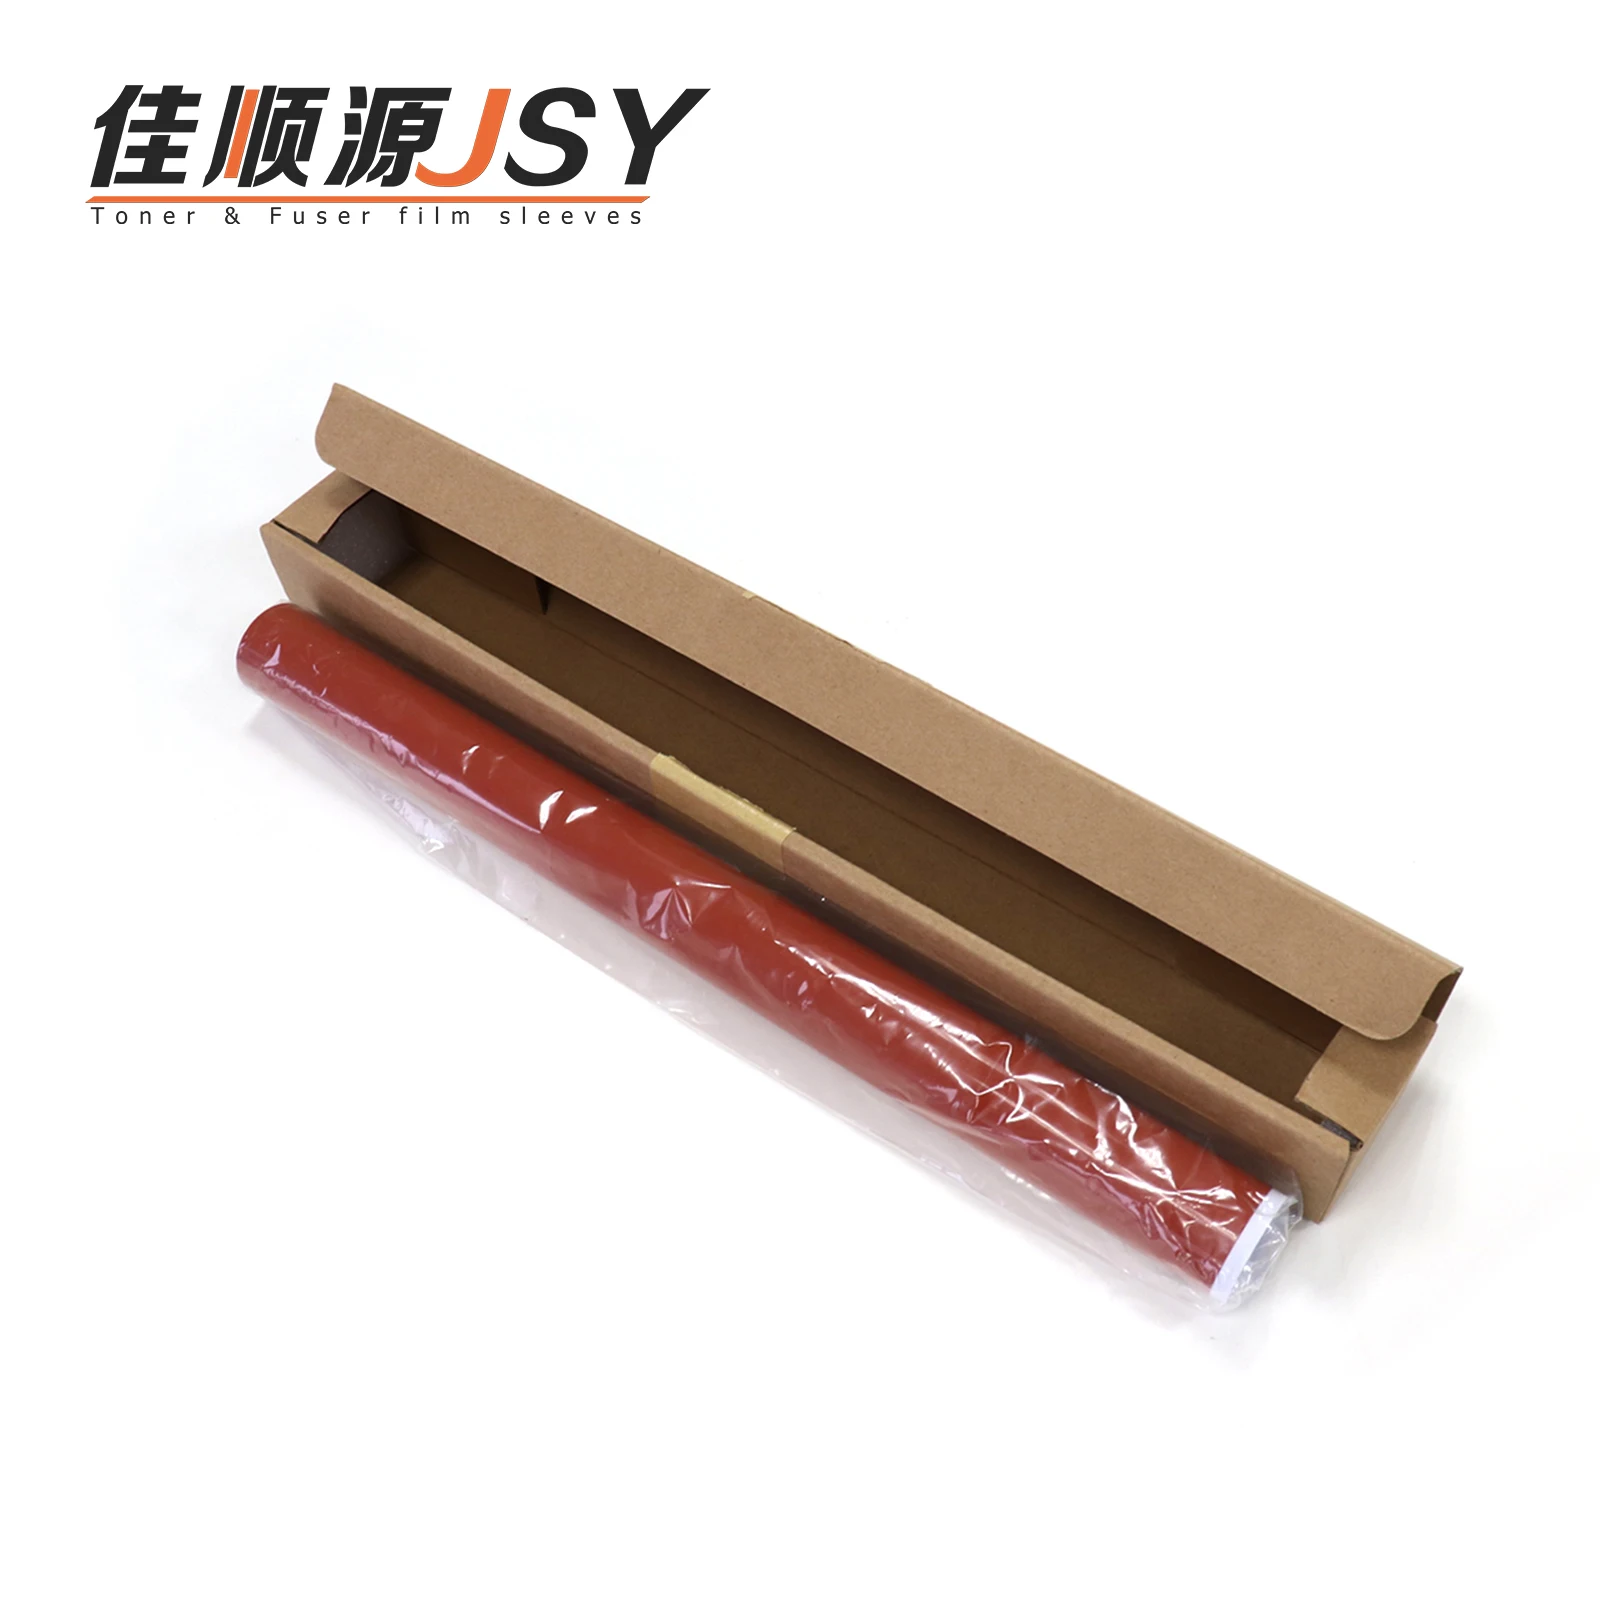 JSY Factory Supply High Quality Metal Fuser Film Sleeve Compatible For iR C5030 C5035 C5045 C5051 C5235